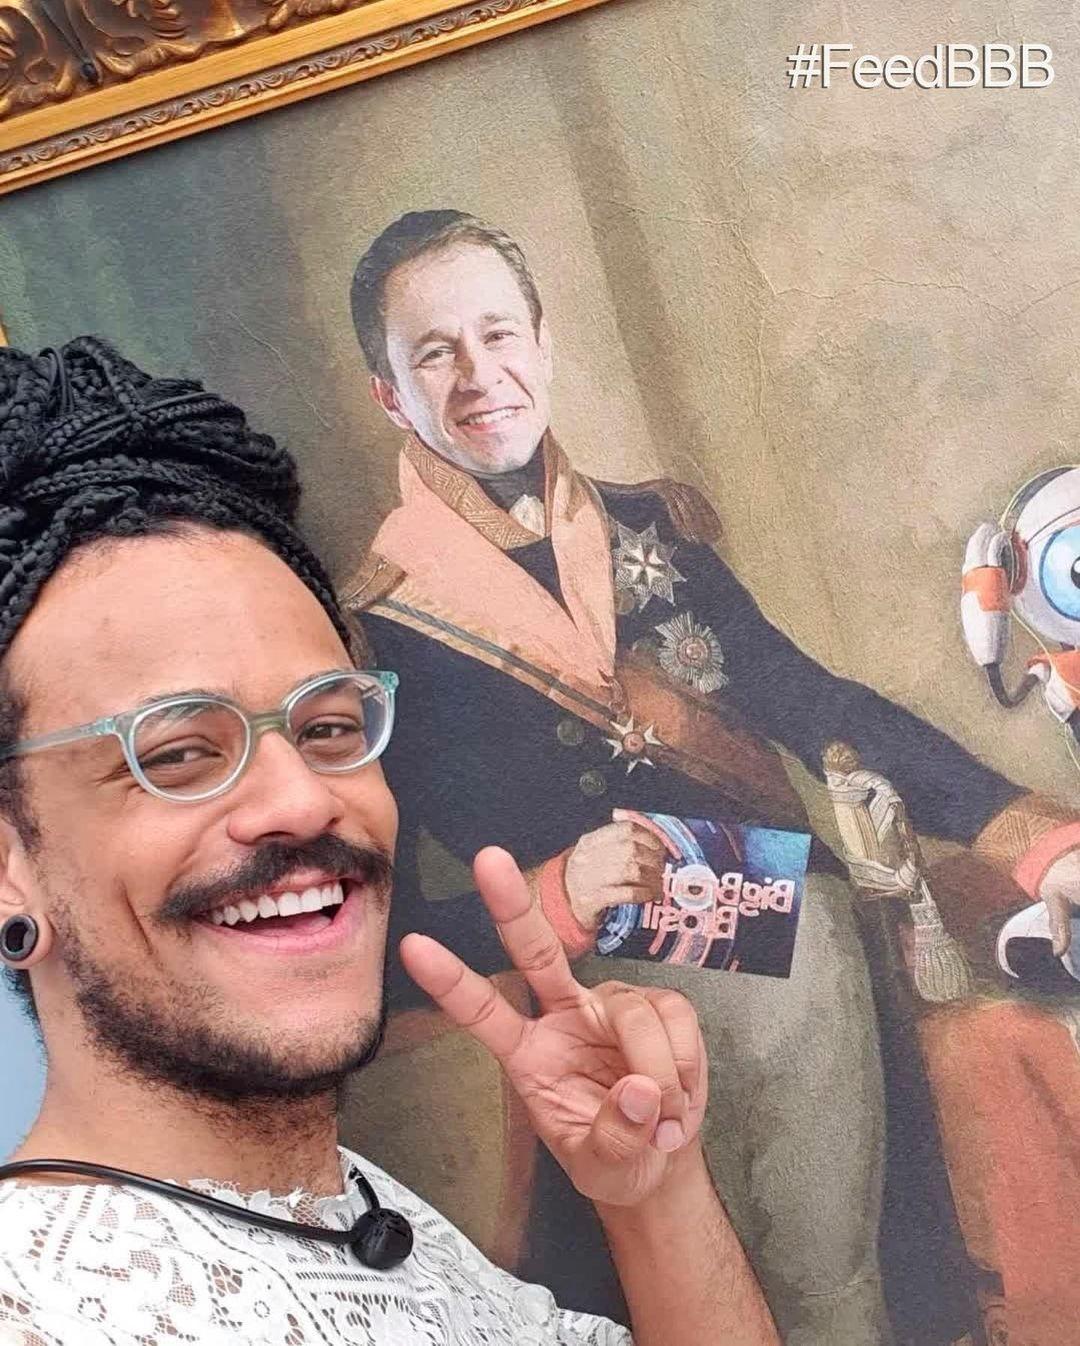 Joao Luiz poses with a painting of Thiago Levert in the leader's room that day "BBB 101 Day" - clone / Instagram